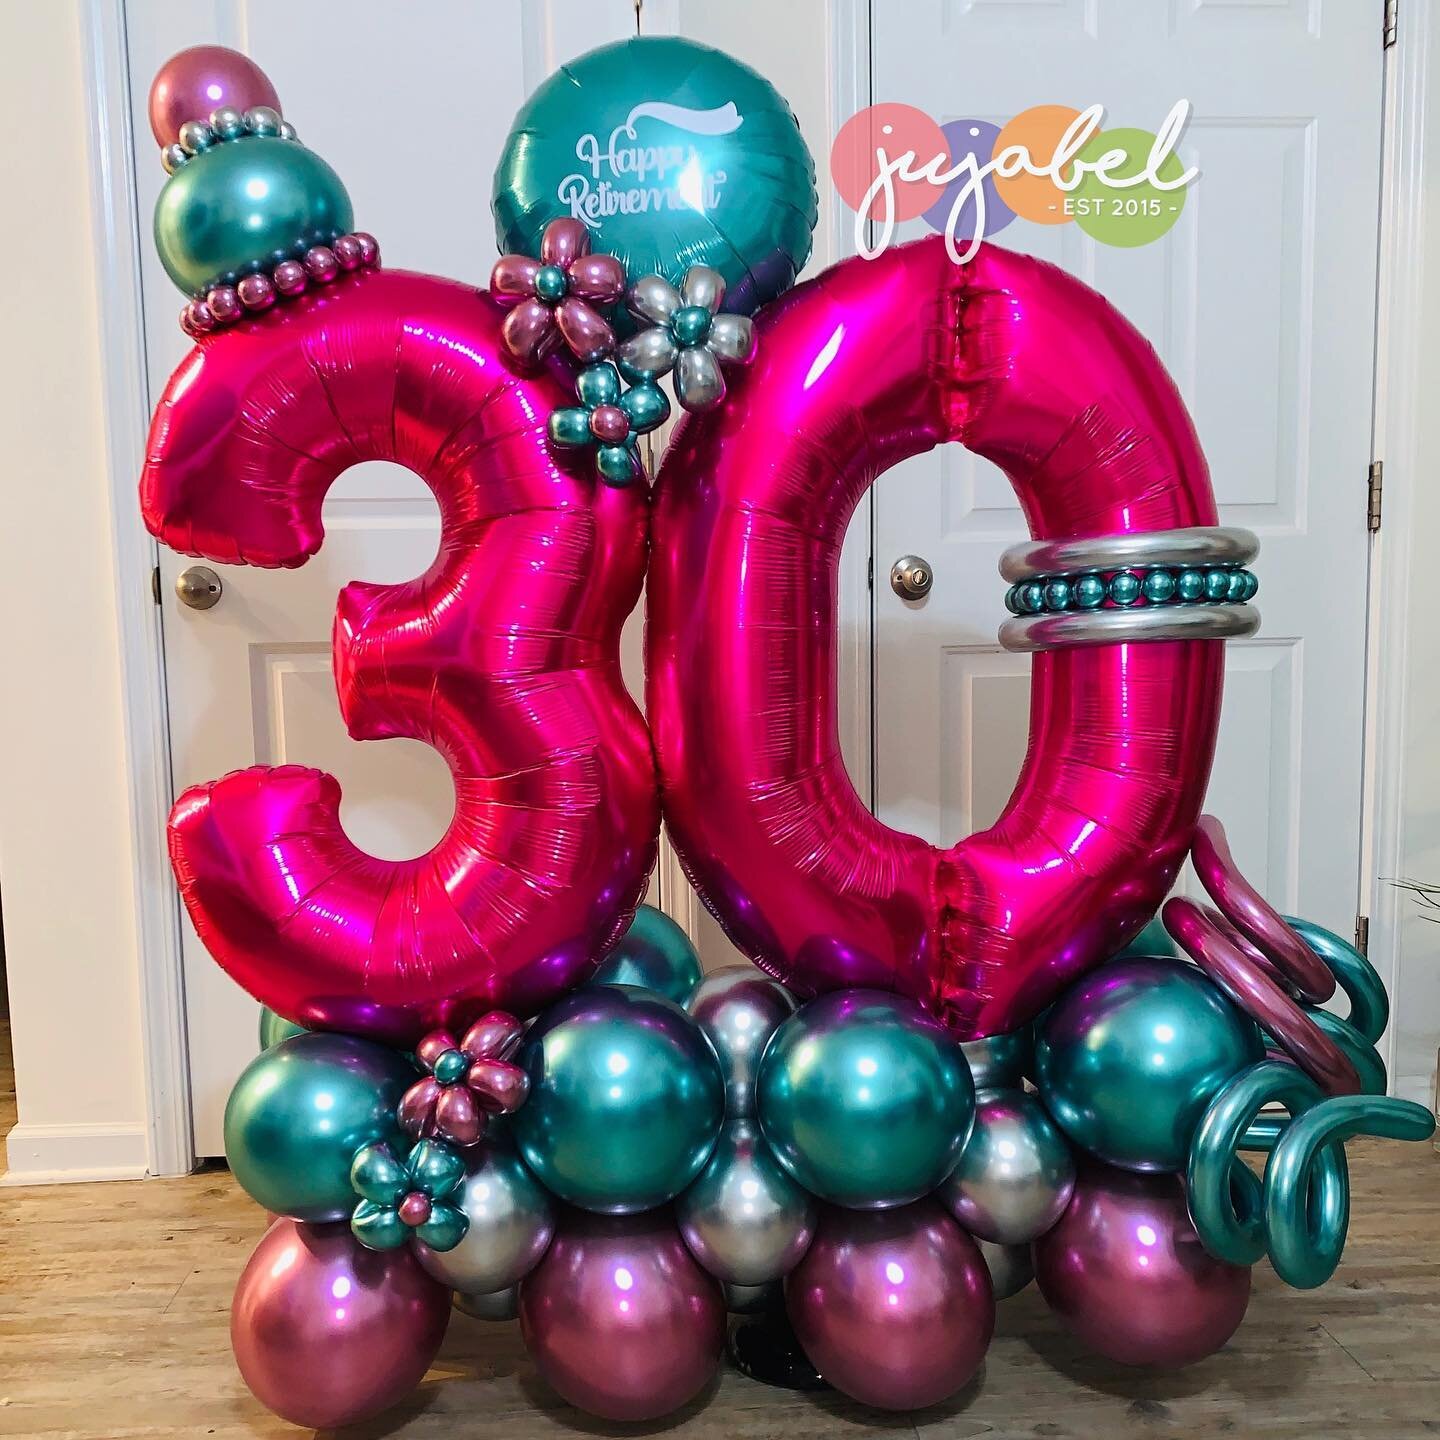 Last week this young lady celebrated her retirement after 30 years with the Department of Health and Human Services with a drive through celebration! Congrats on you&rsquo;re retirement ❤️

#balloons #balloondecor #balloonmarquee #balloonbouquet #ncb